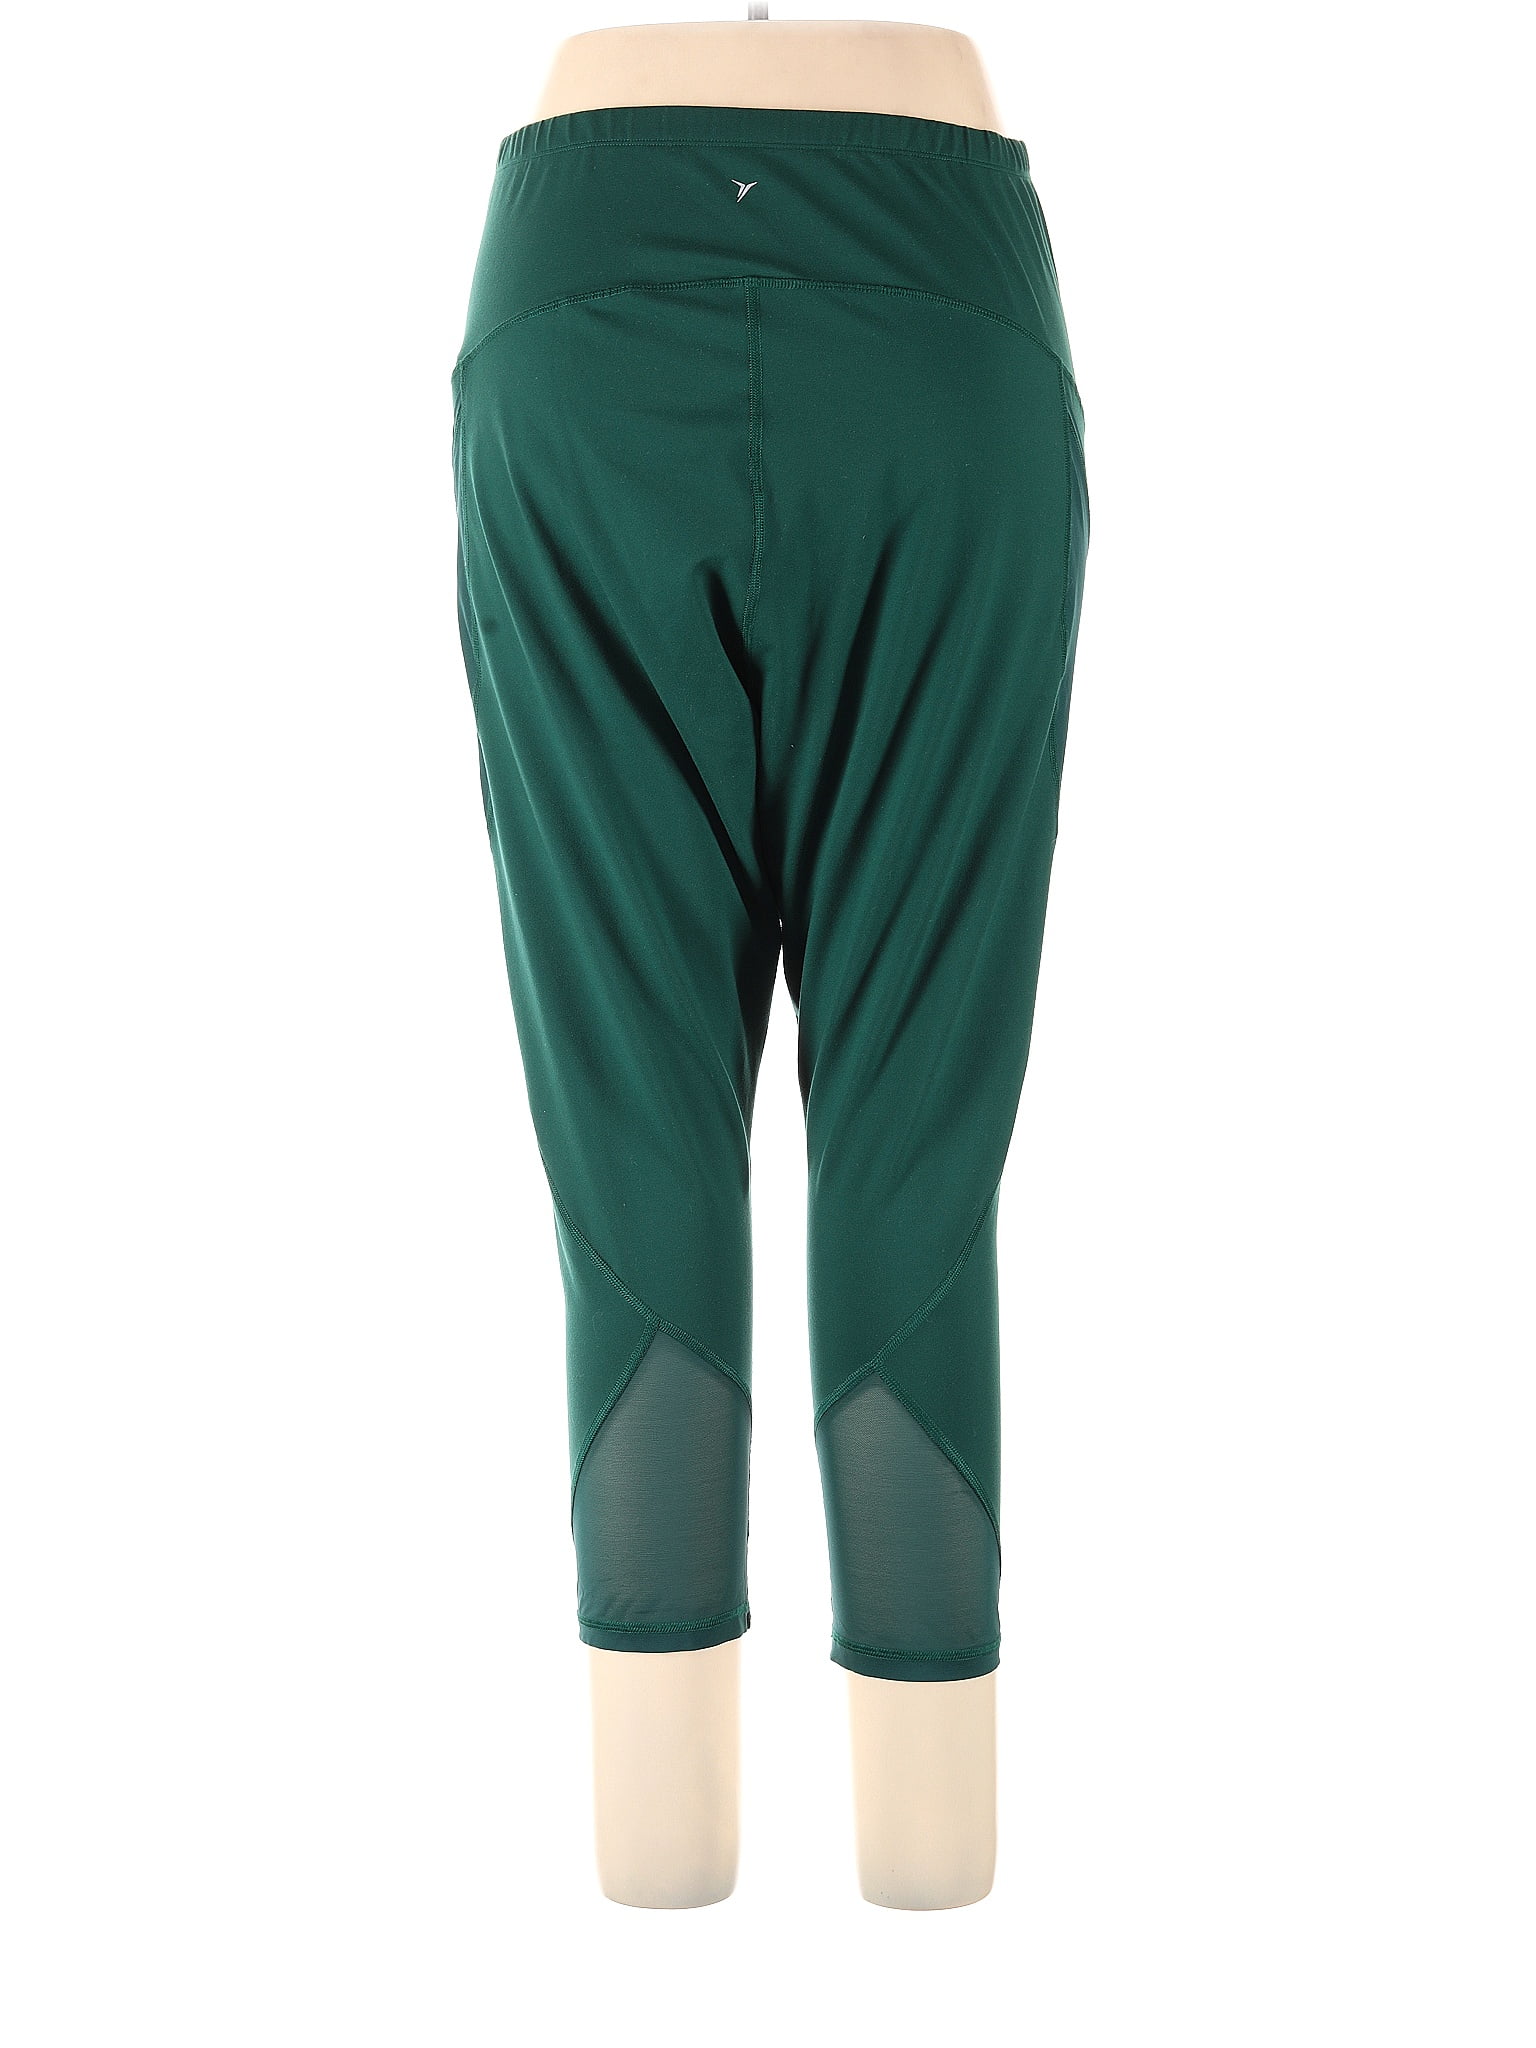 Active by Old Navy Solid Green Leggings Size XL - 42% off